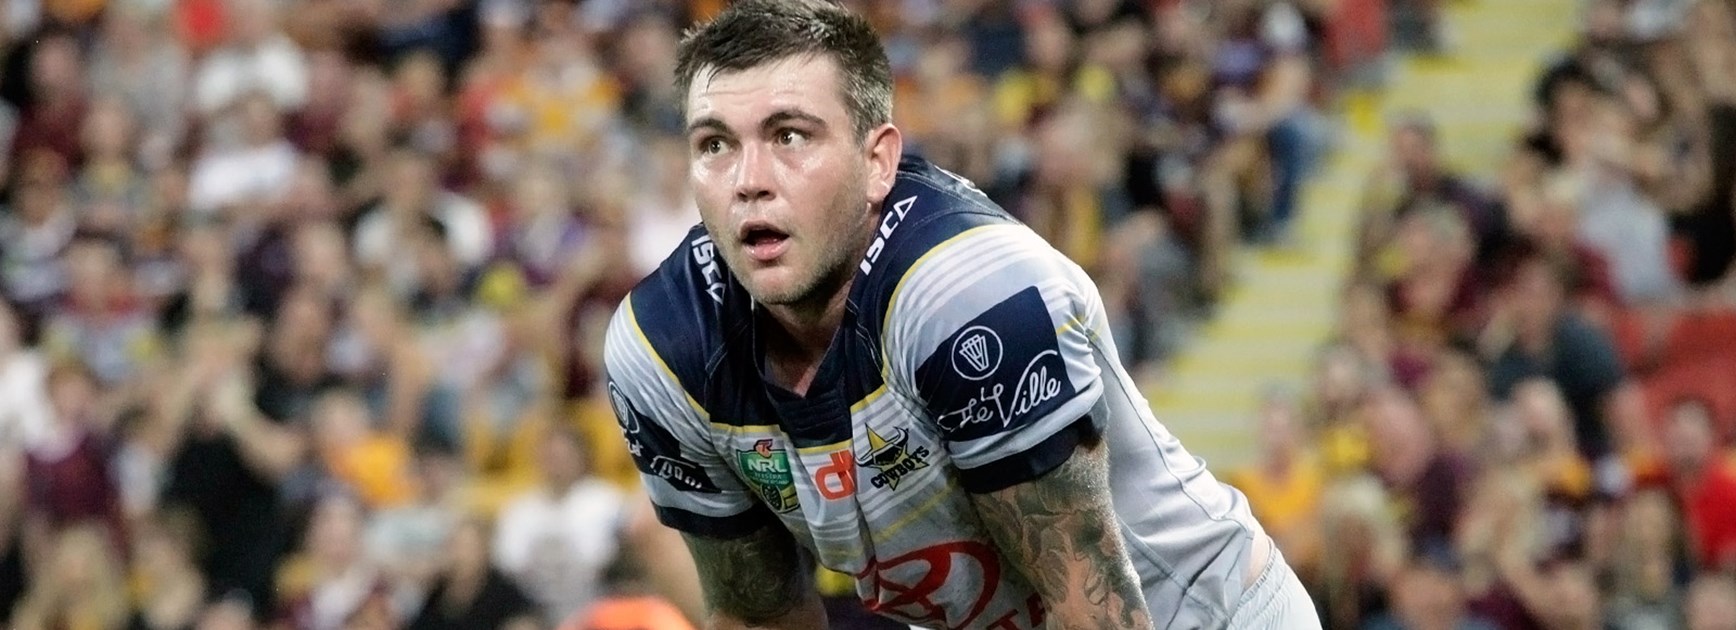 Cowboys winger Kyle Feldt had a mixed night against the Broncos in Round 11.